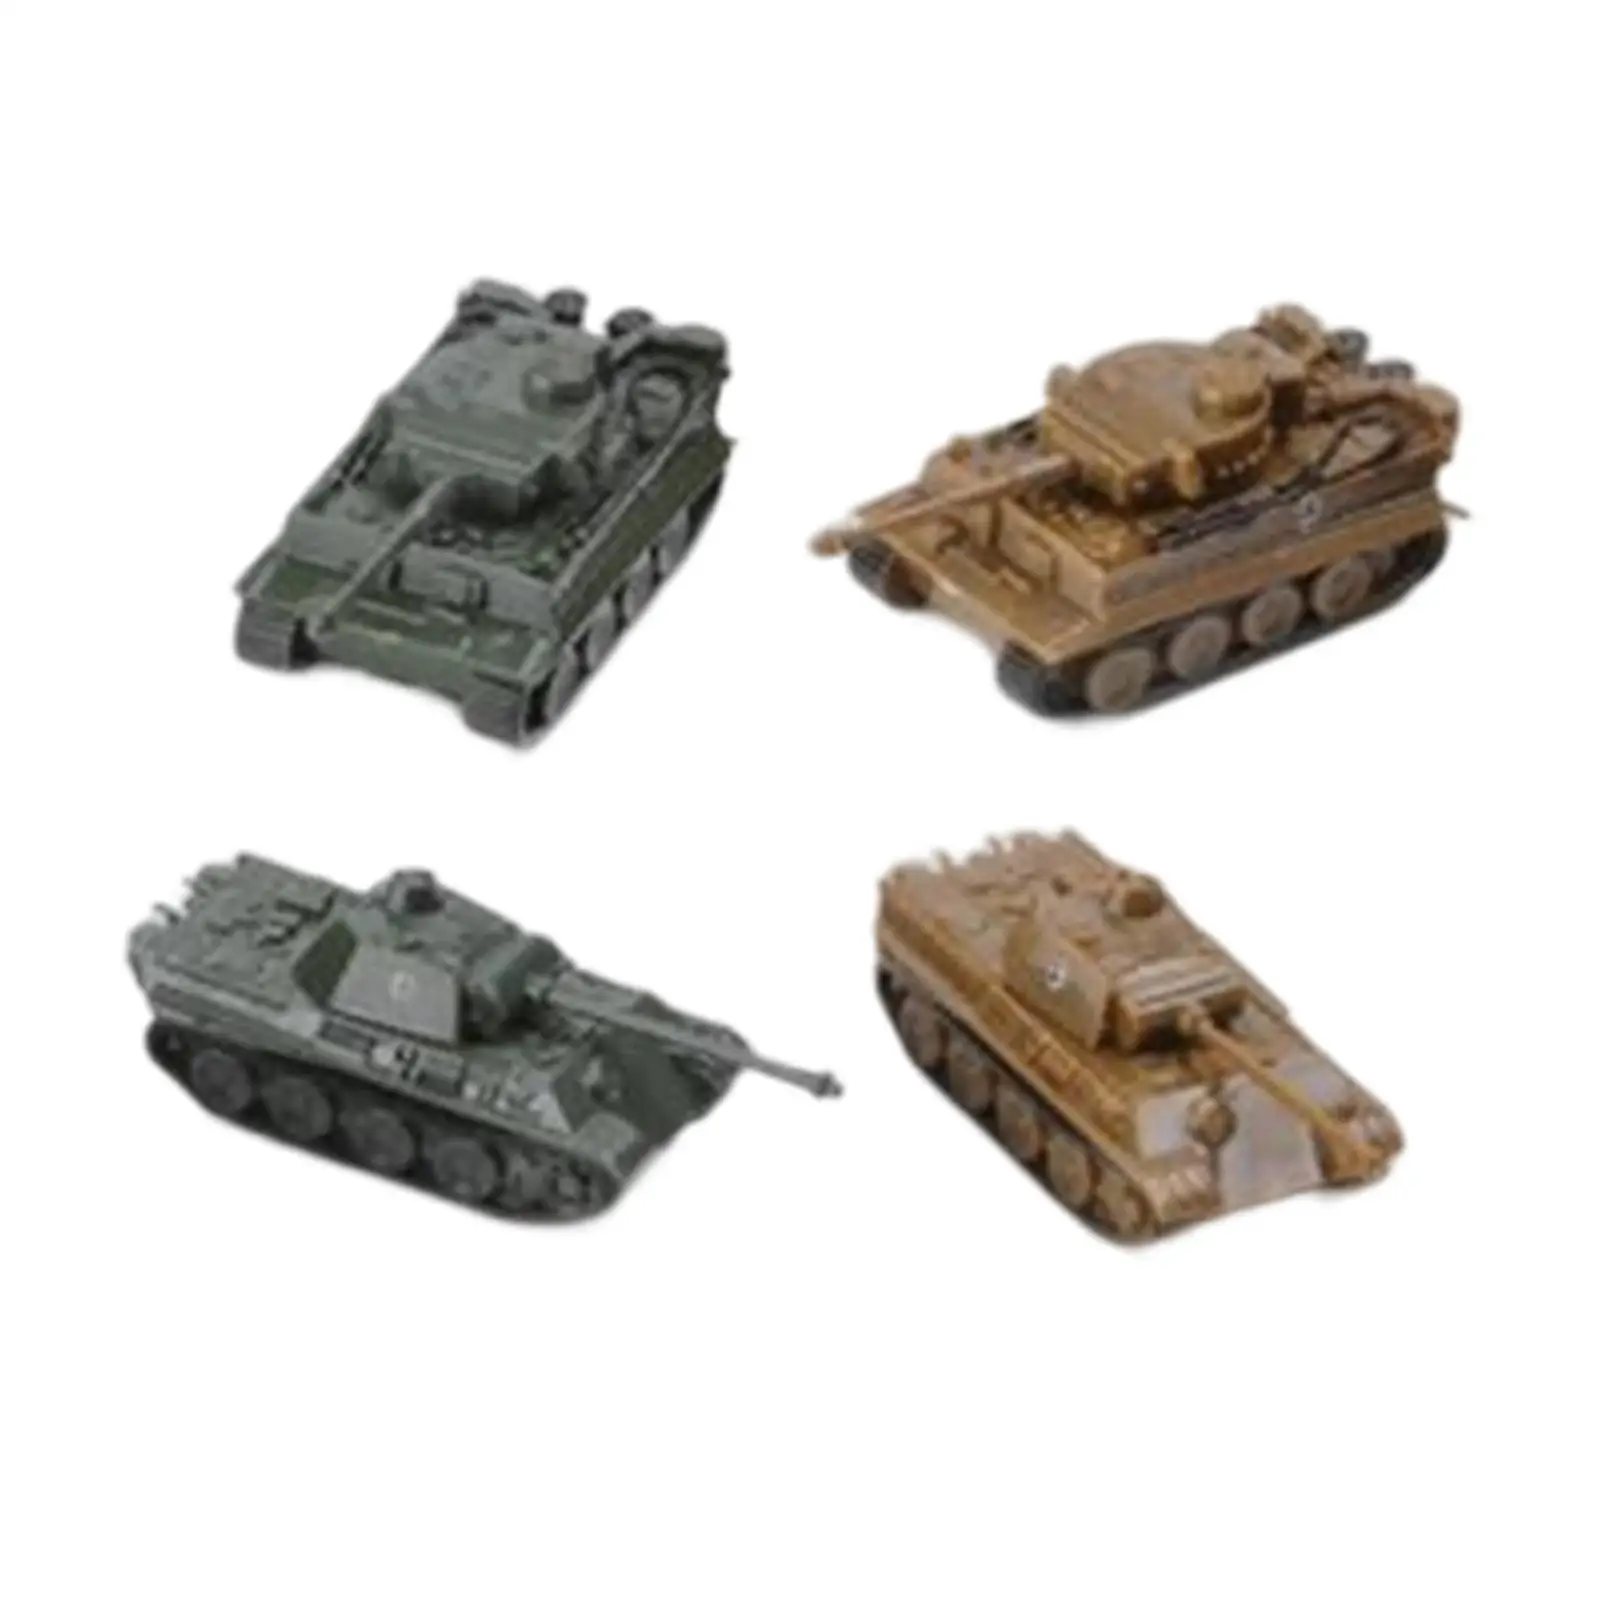 1:144 Scale Tank Model Tiger Panther Type Steel Bead Gliding 4D Modern Tank Model DIY Puzzle for Children Tabletop Decor Display